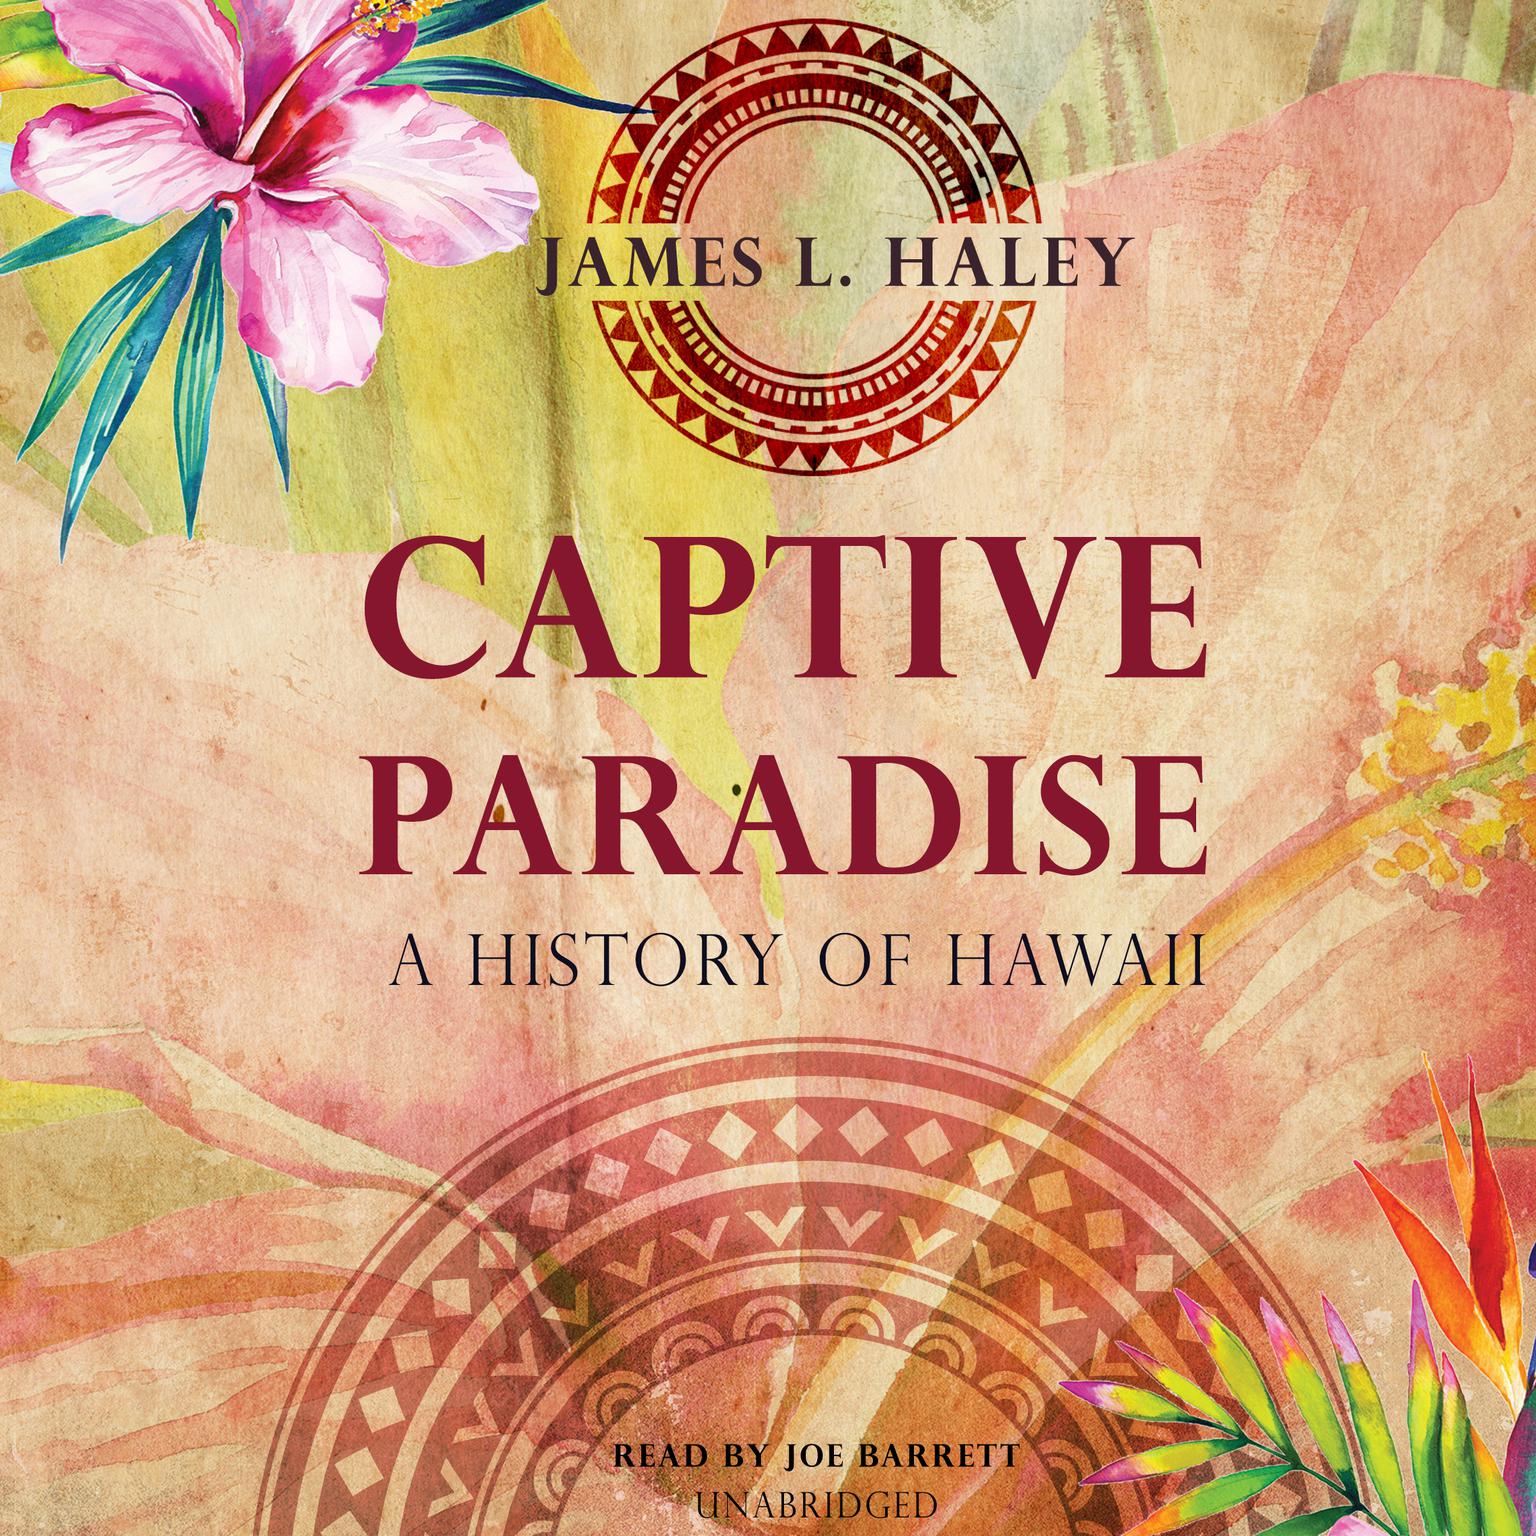 Captive Paradise: A History of Hawaii Audiobook, by James L. Haley